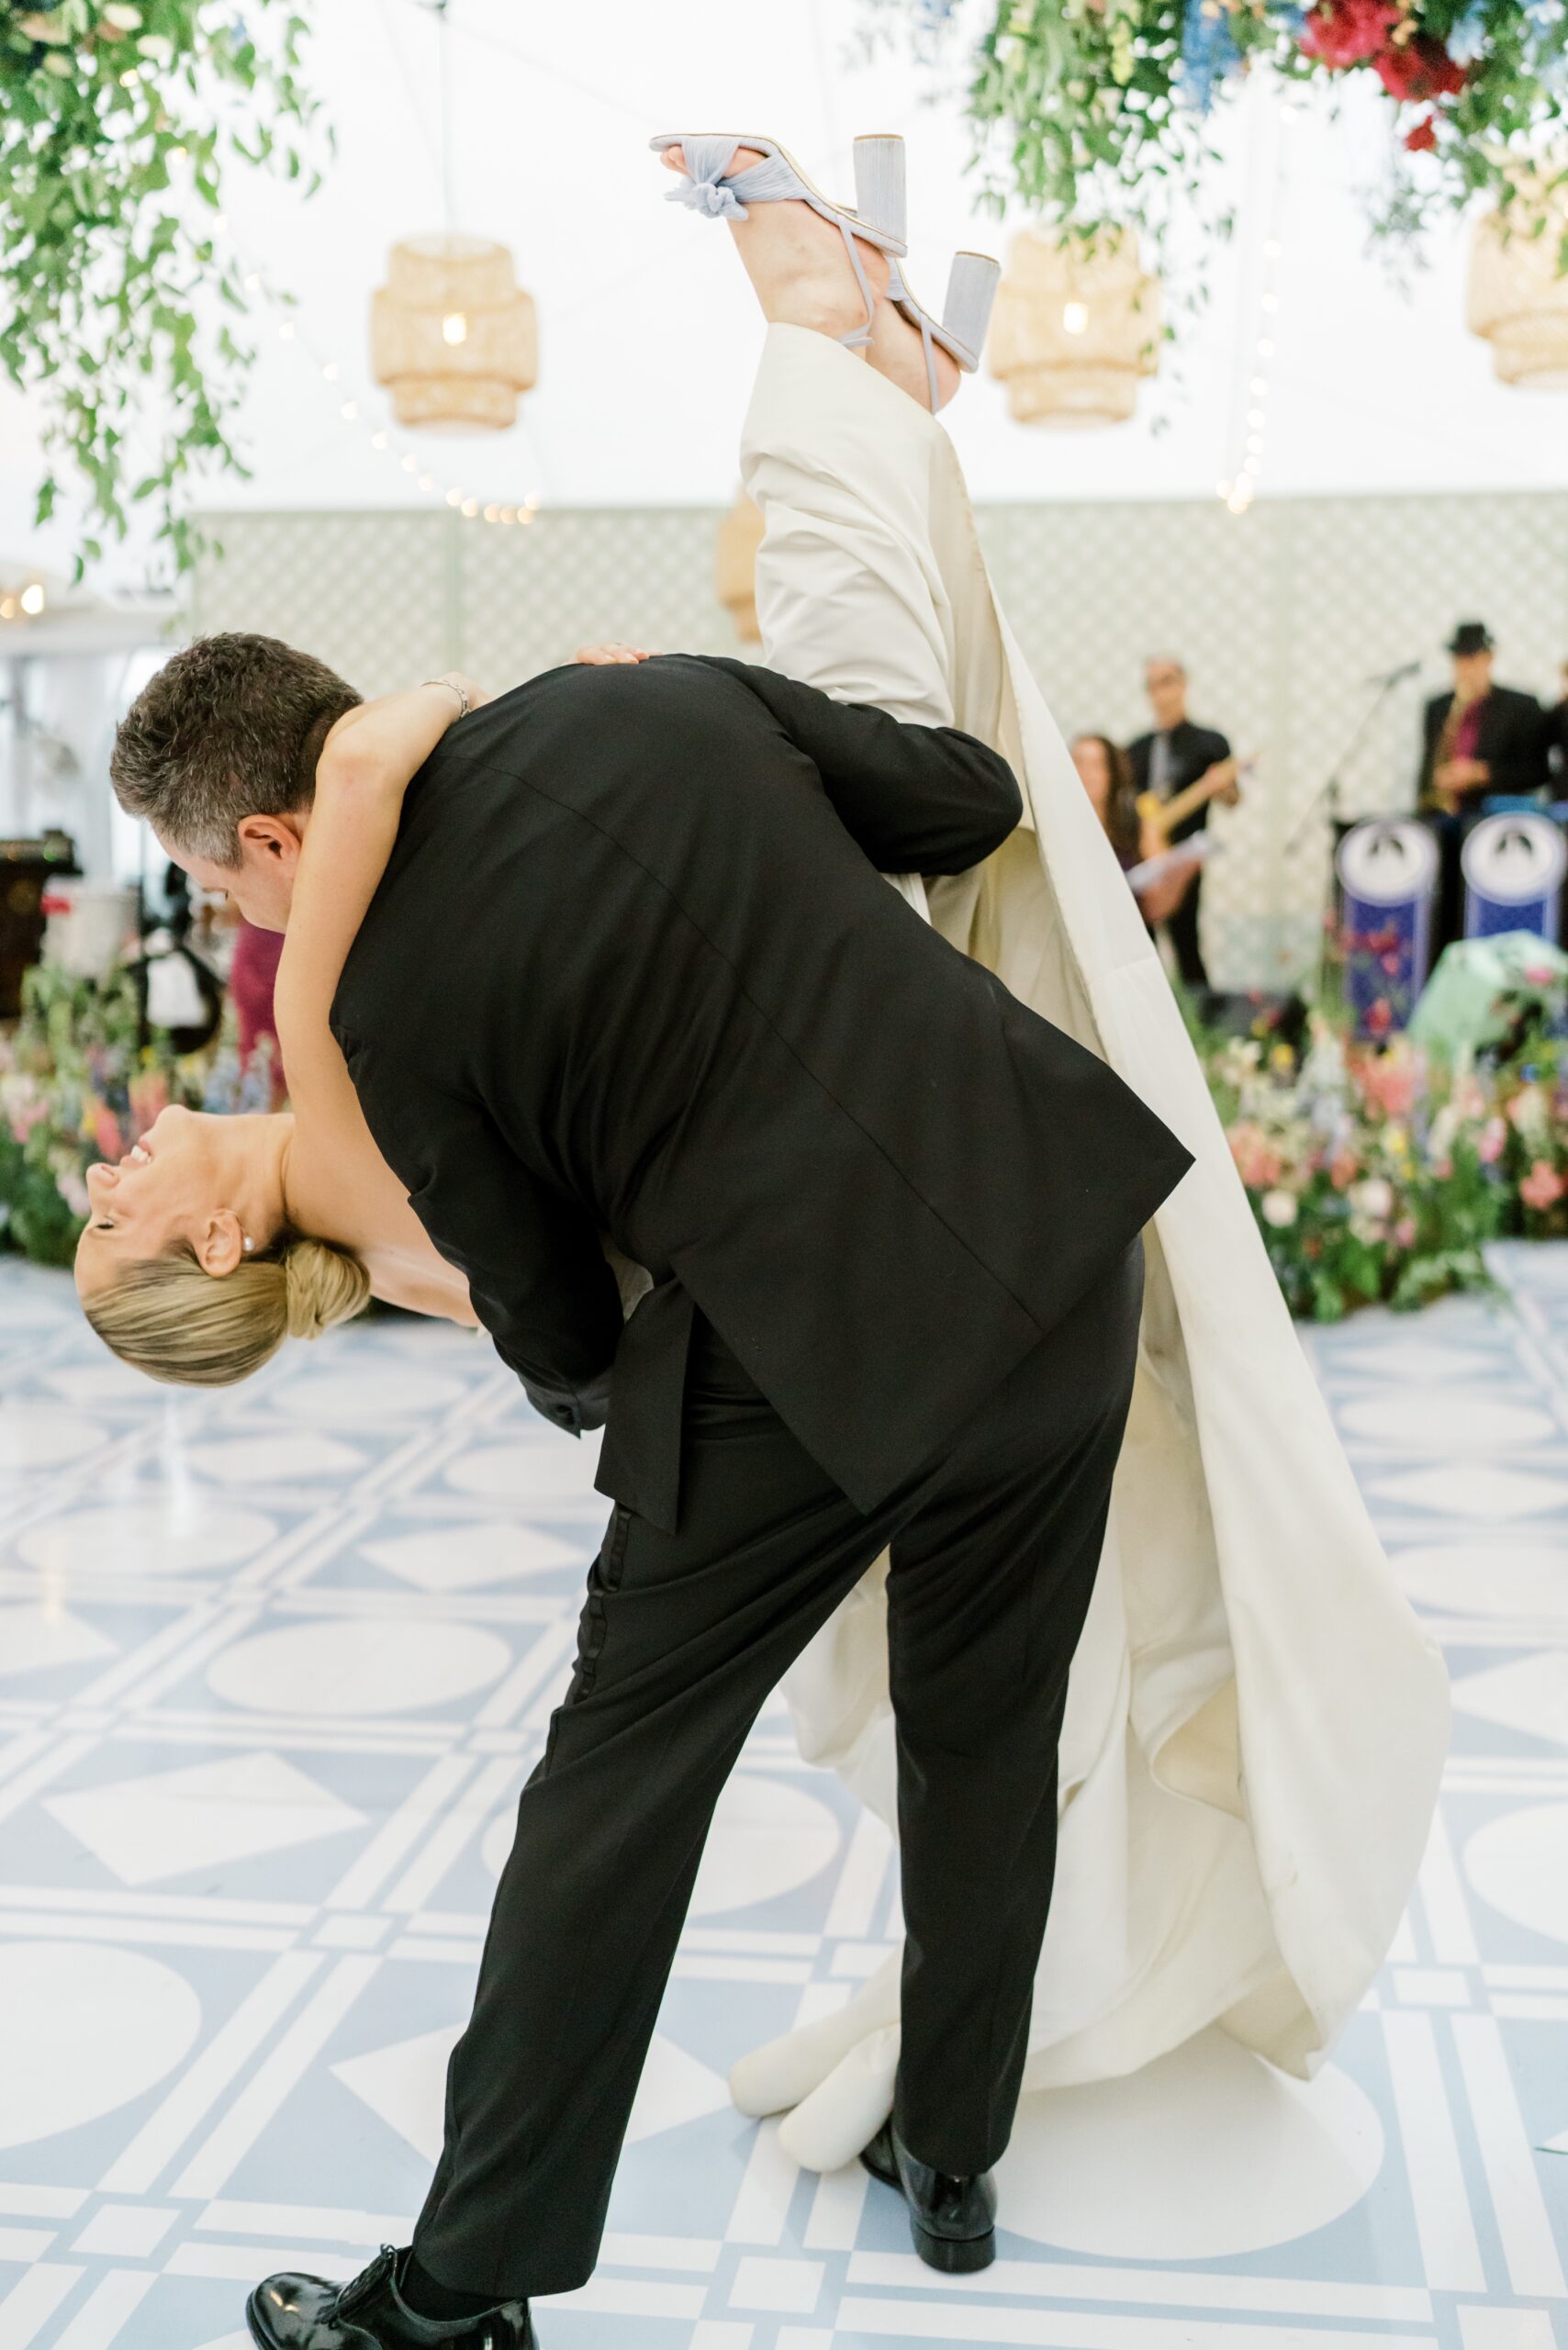 Bride and groom first dance at the Pocono Mountain wedding reception